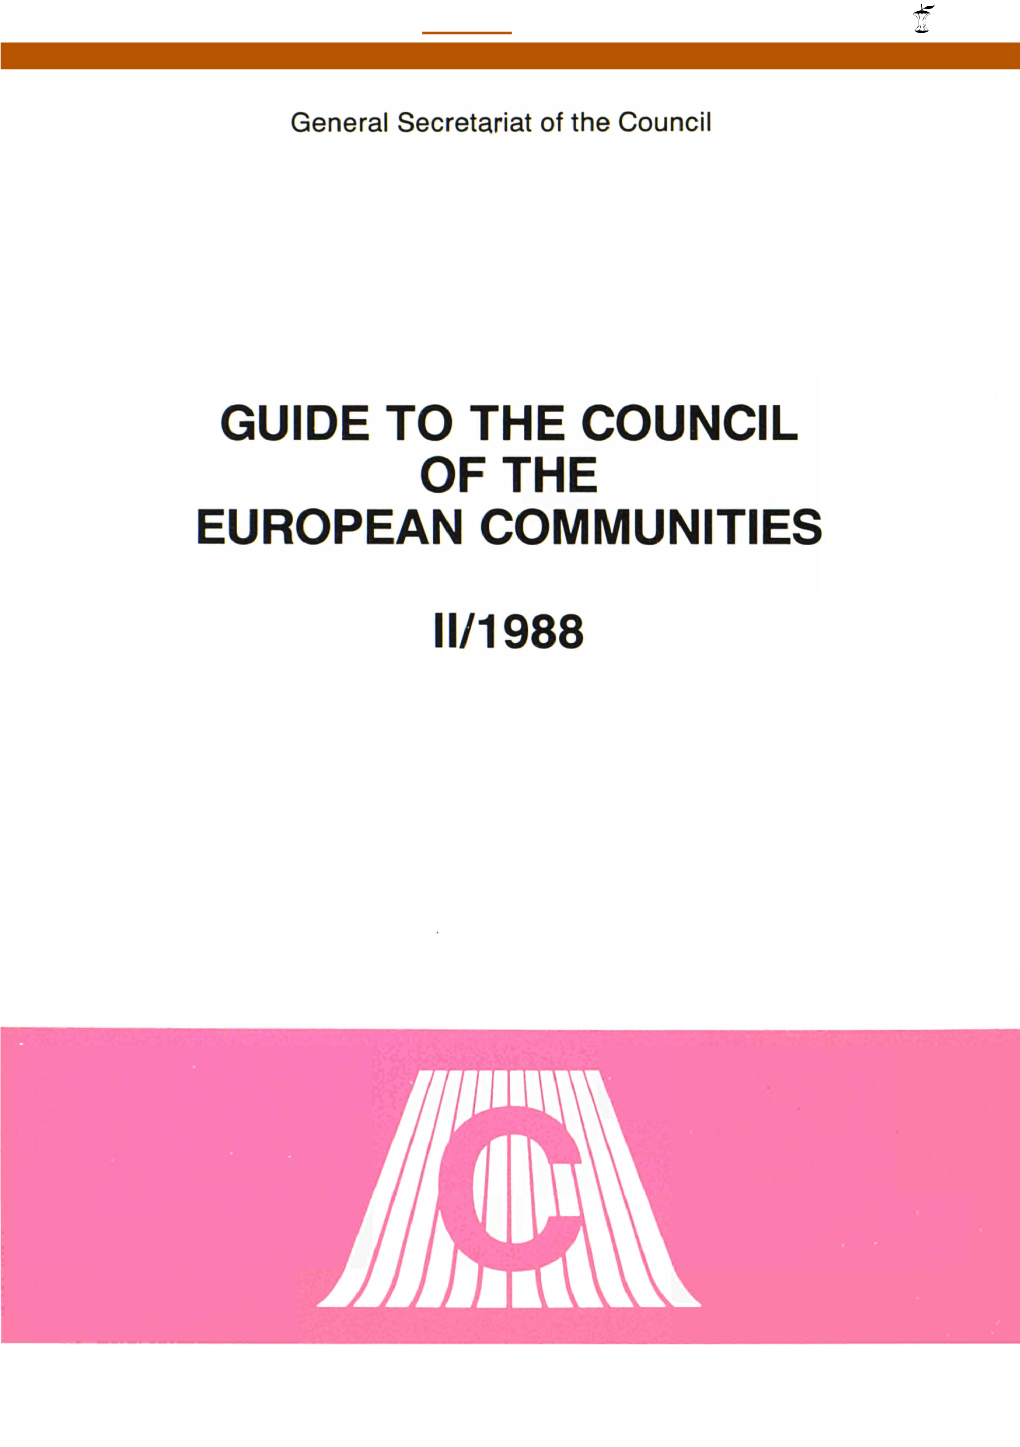 Guide to the Council of the European Communities : II/1988